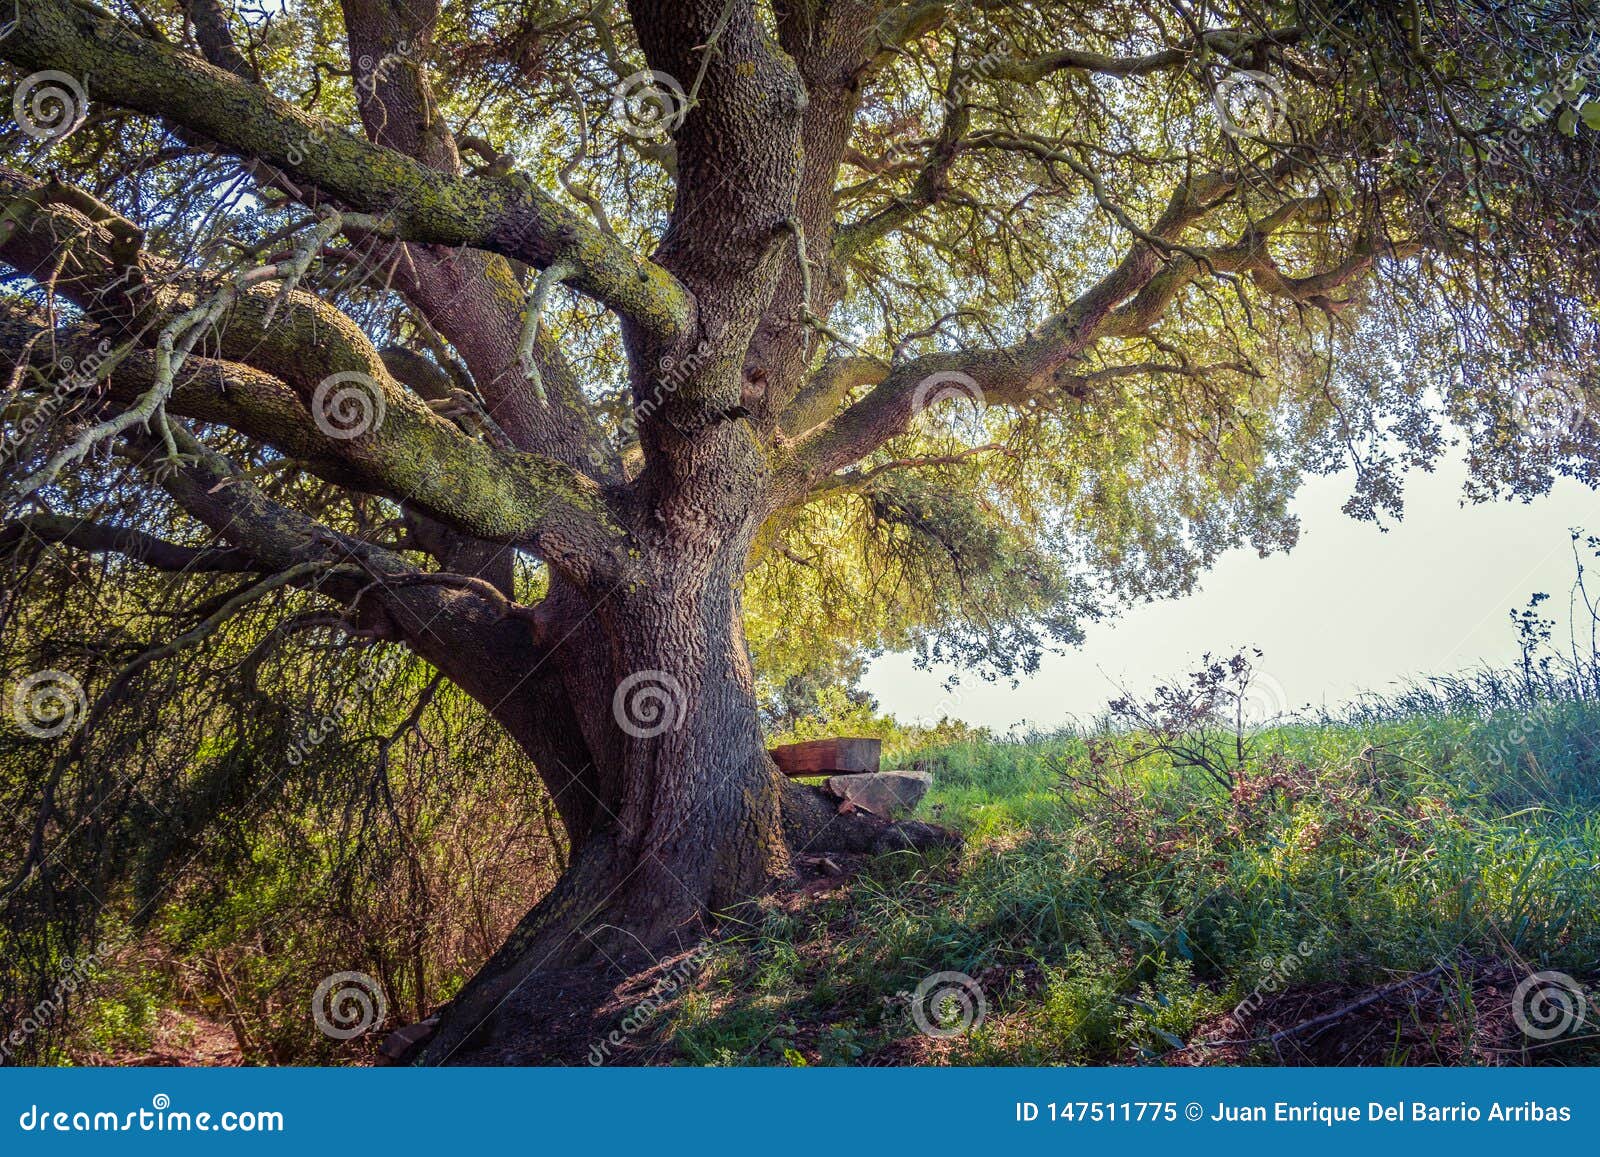 millenary oak in the province of segovia in the small town of madriguera spain